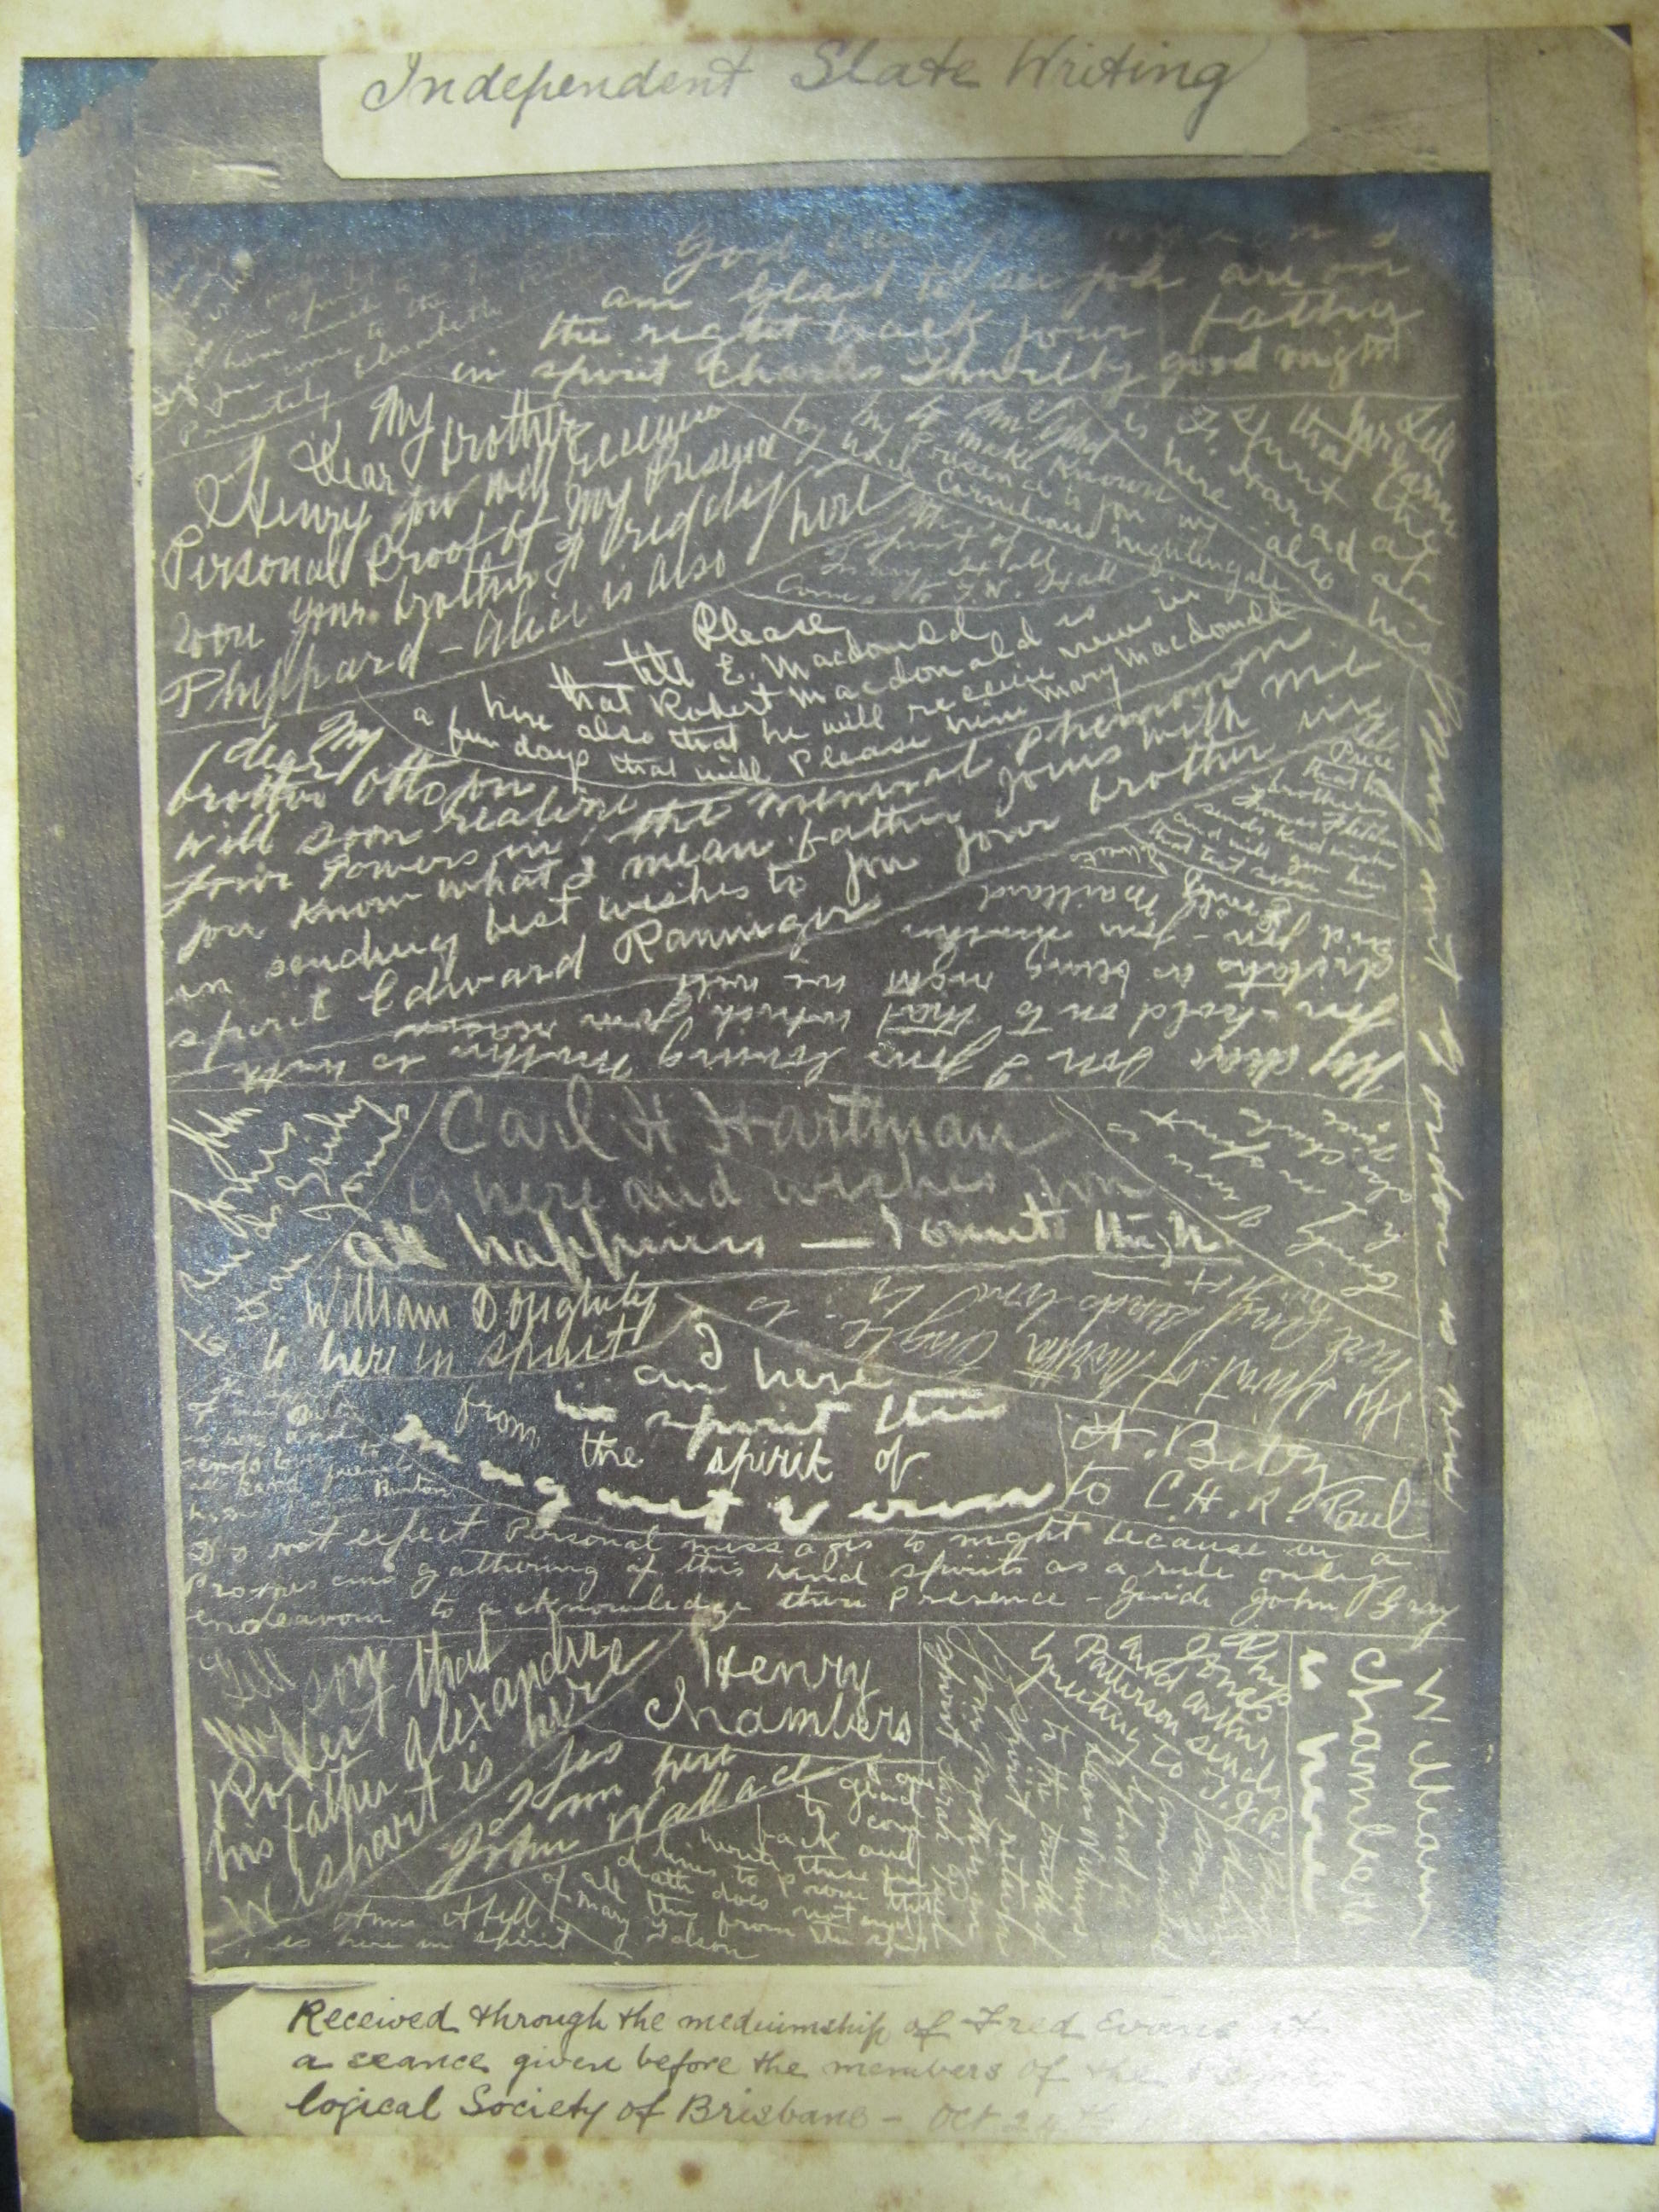 Photograph of spirit slate-writing which occurred during a séance in Brisbane on 24 October 1888. 